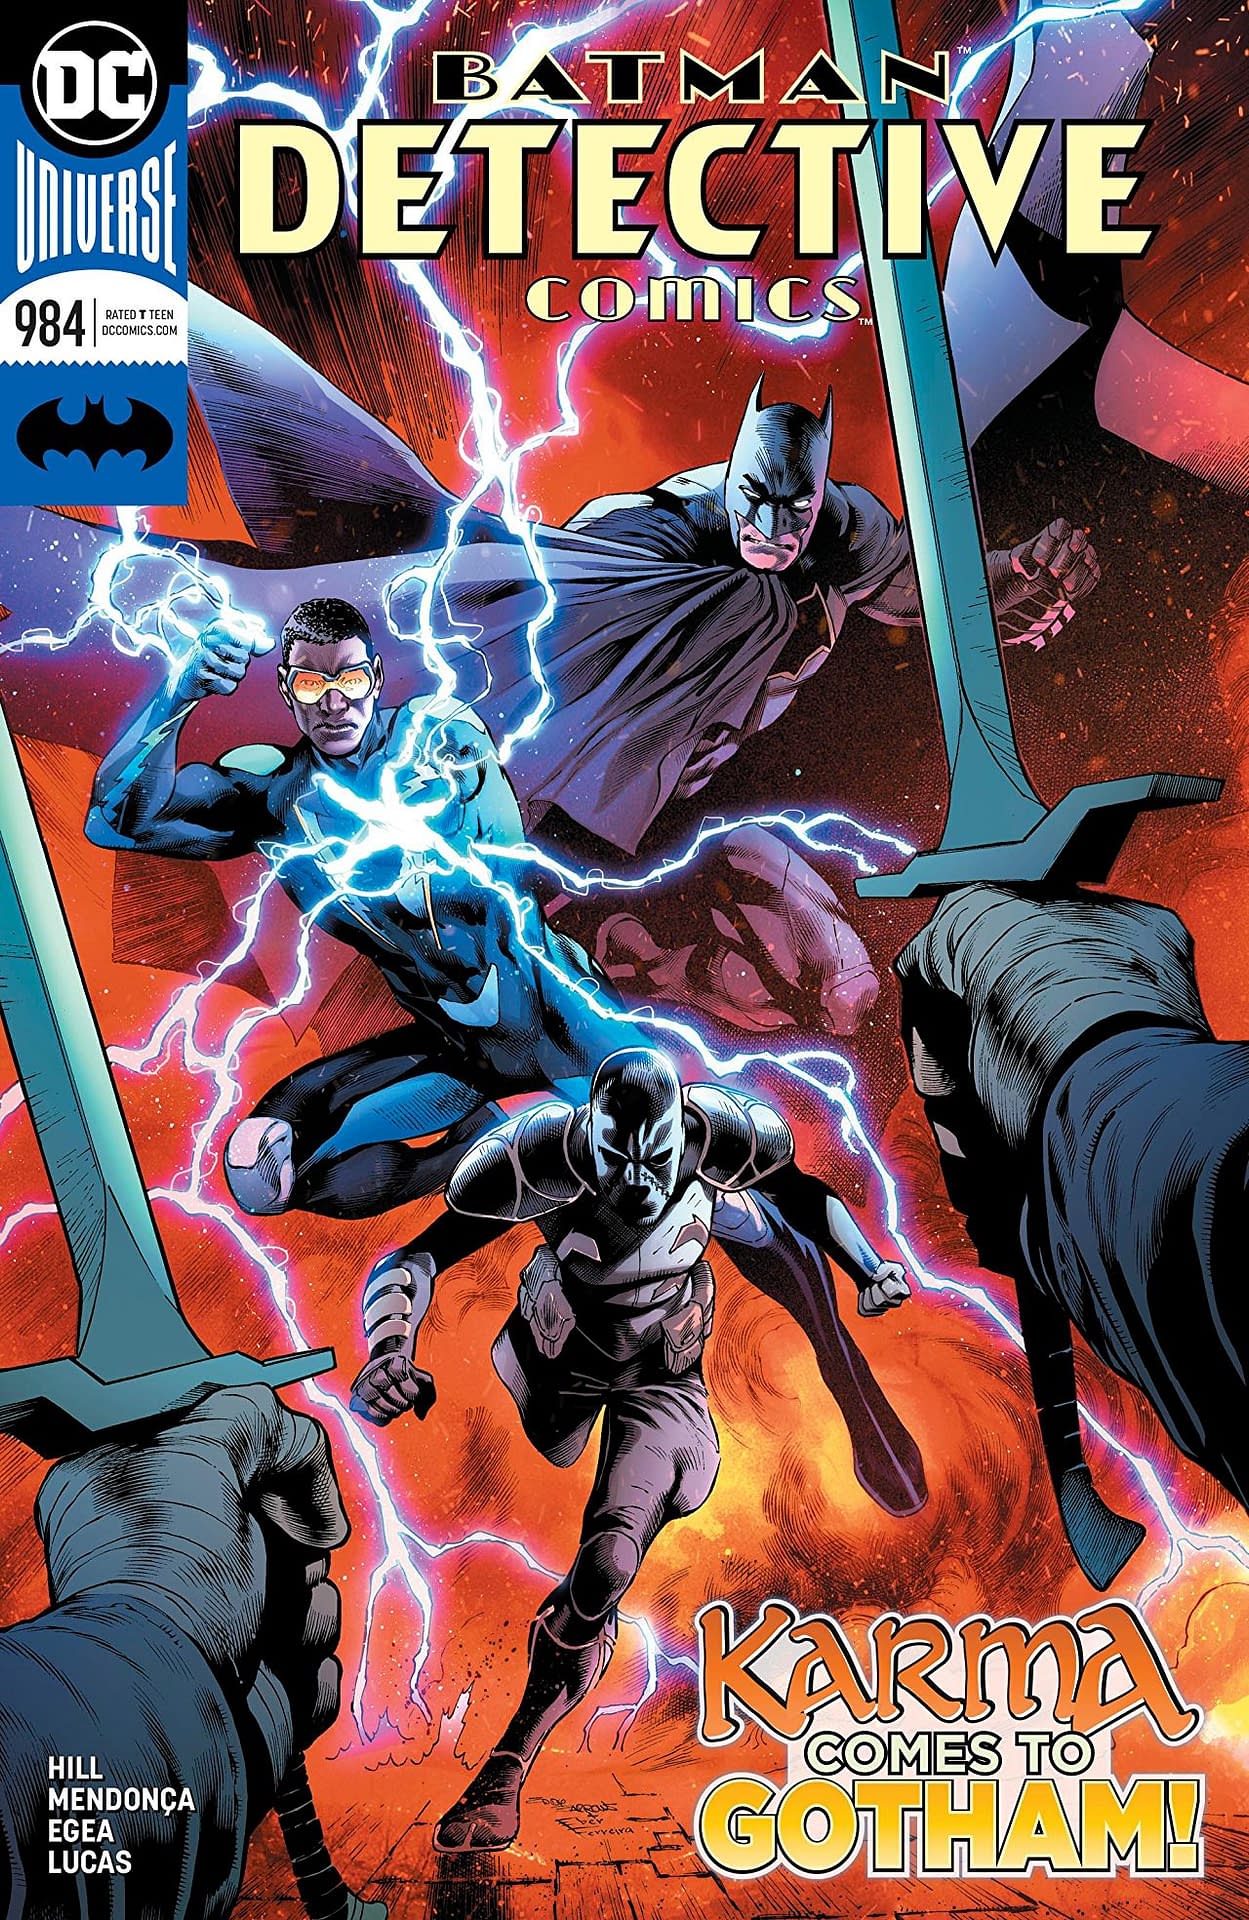 Detective Comics #984 Review: Another Great Issue for the Gotham Team